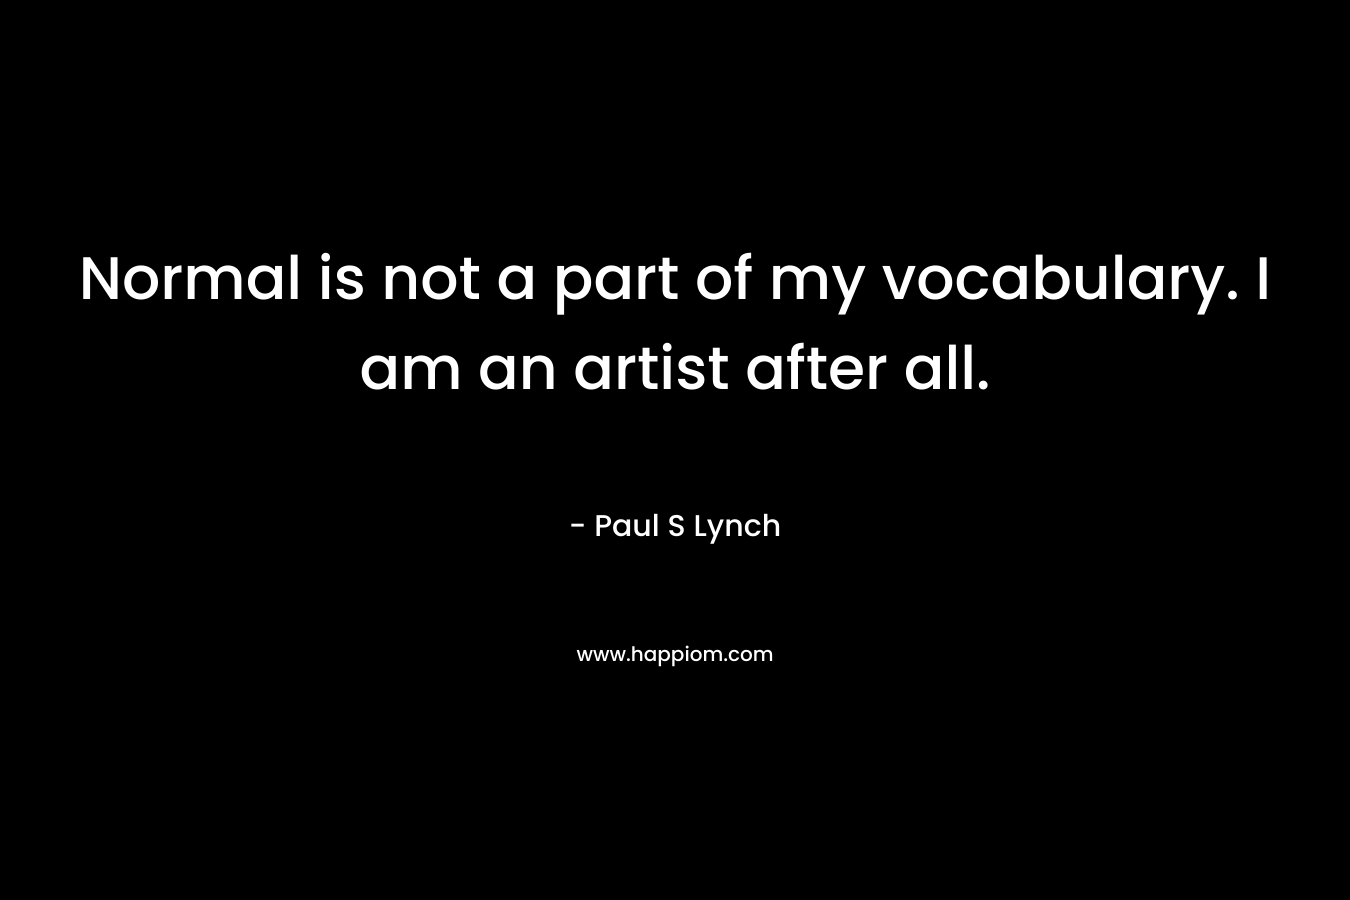 Normal is not a part of my vocabulary. I am an artist after all. – Paul S Lynch